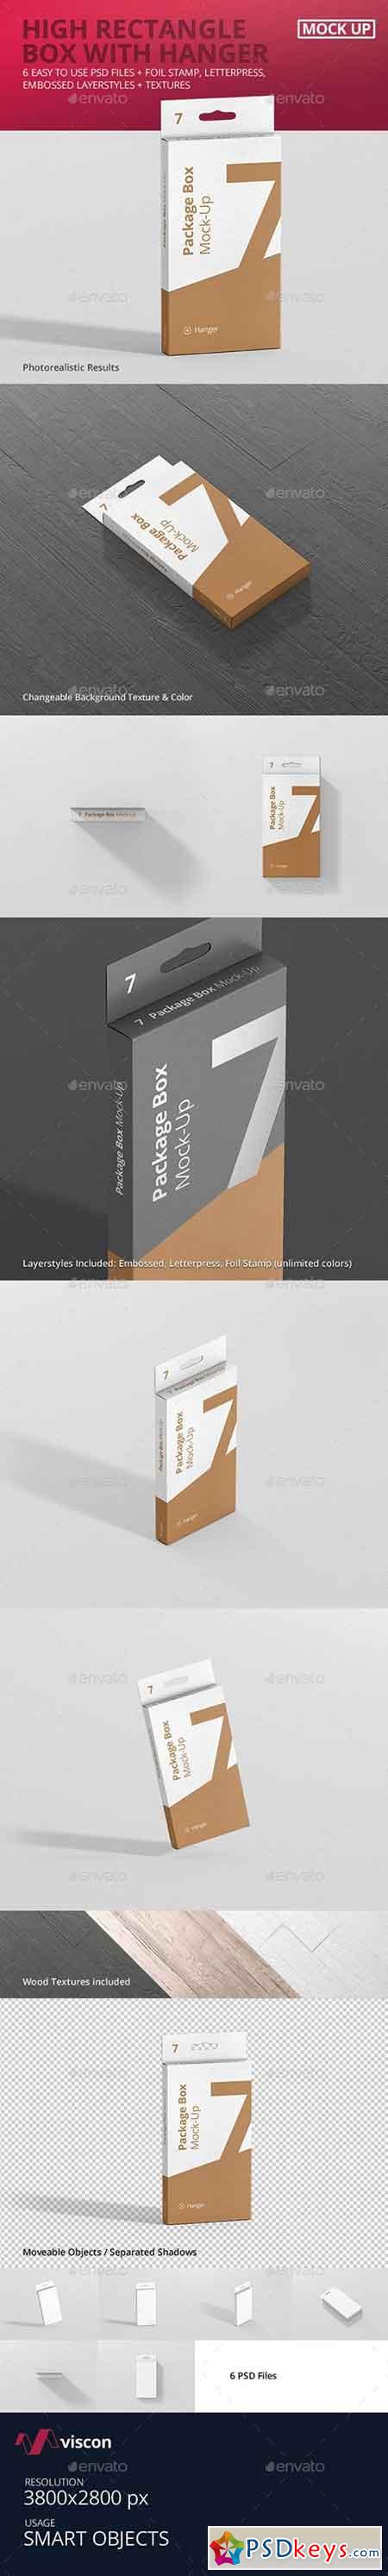 Package Box Mock-Up - High Rectangle with Hanger 18094430